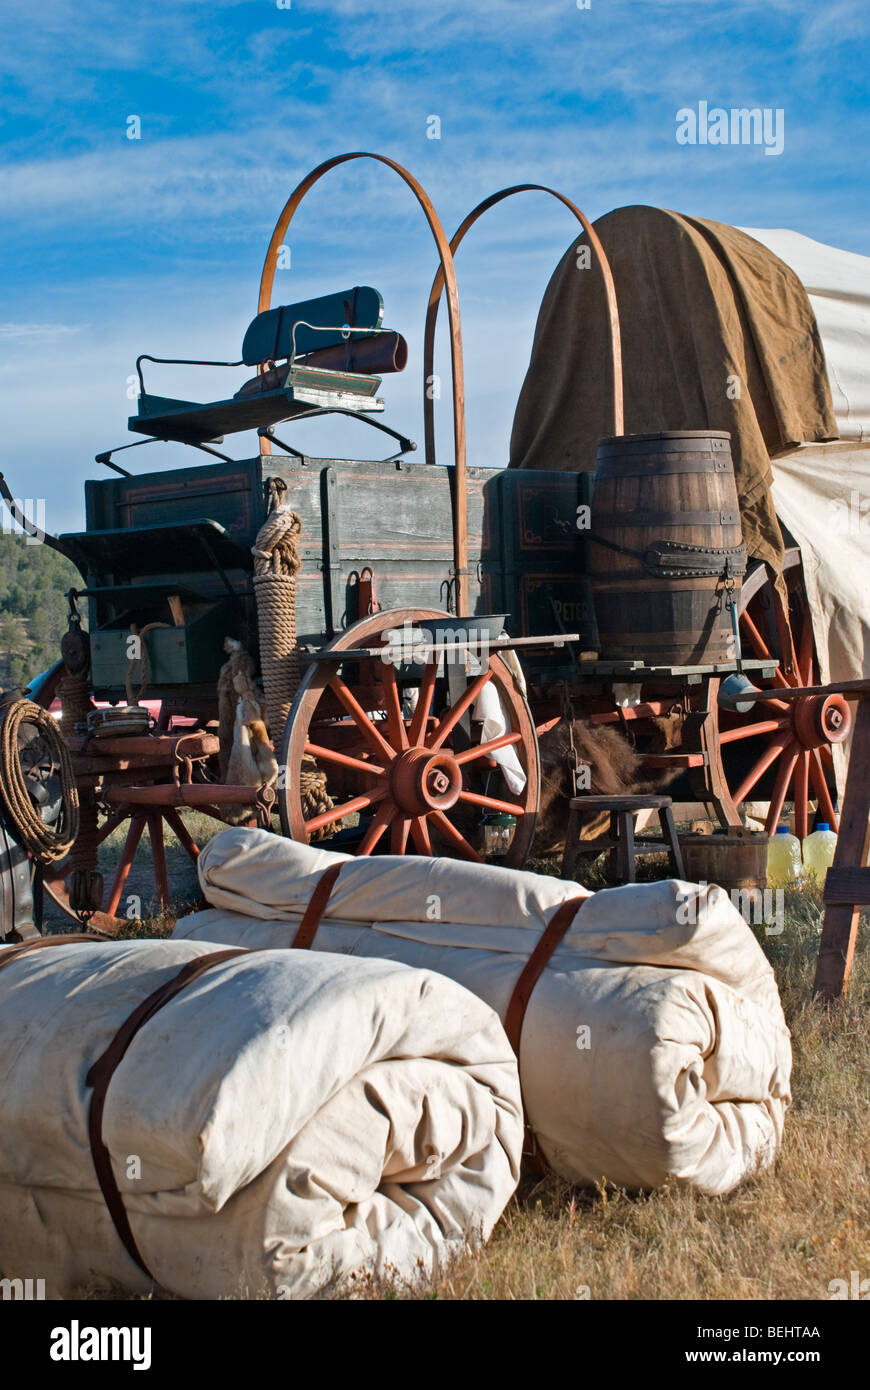 Bedrolls are packed up in anticipation of the annual Cowboy symposium chuck wagon cook-off held in Ruidoso Downs, New Mexico. Stock Photo